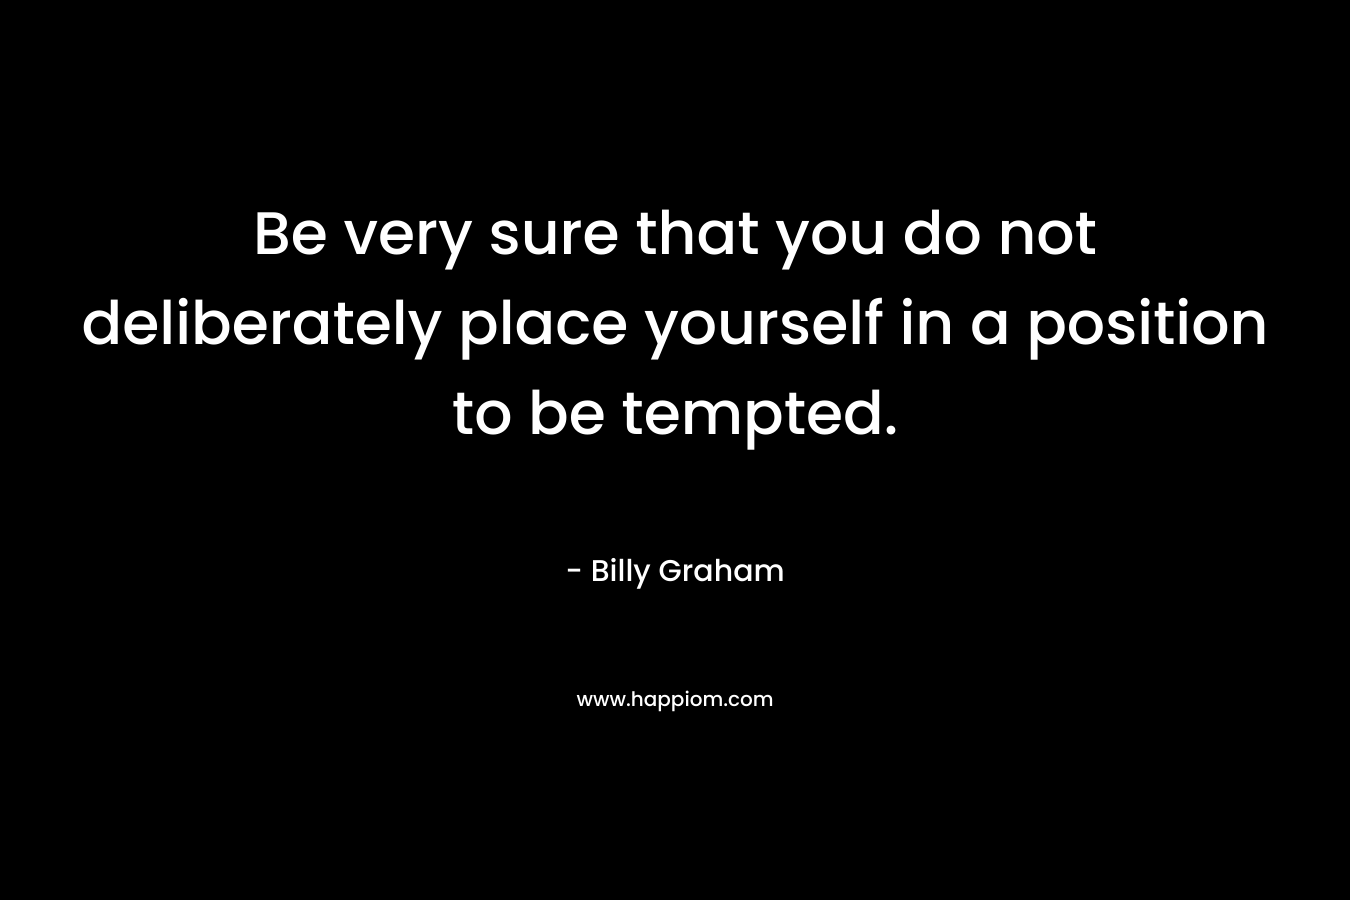 Be very sure that you do not deliberately place yourself in a position to be tempted.